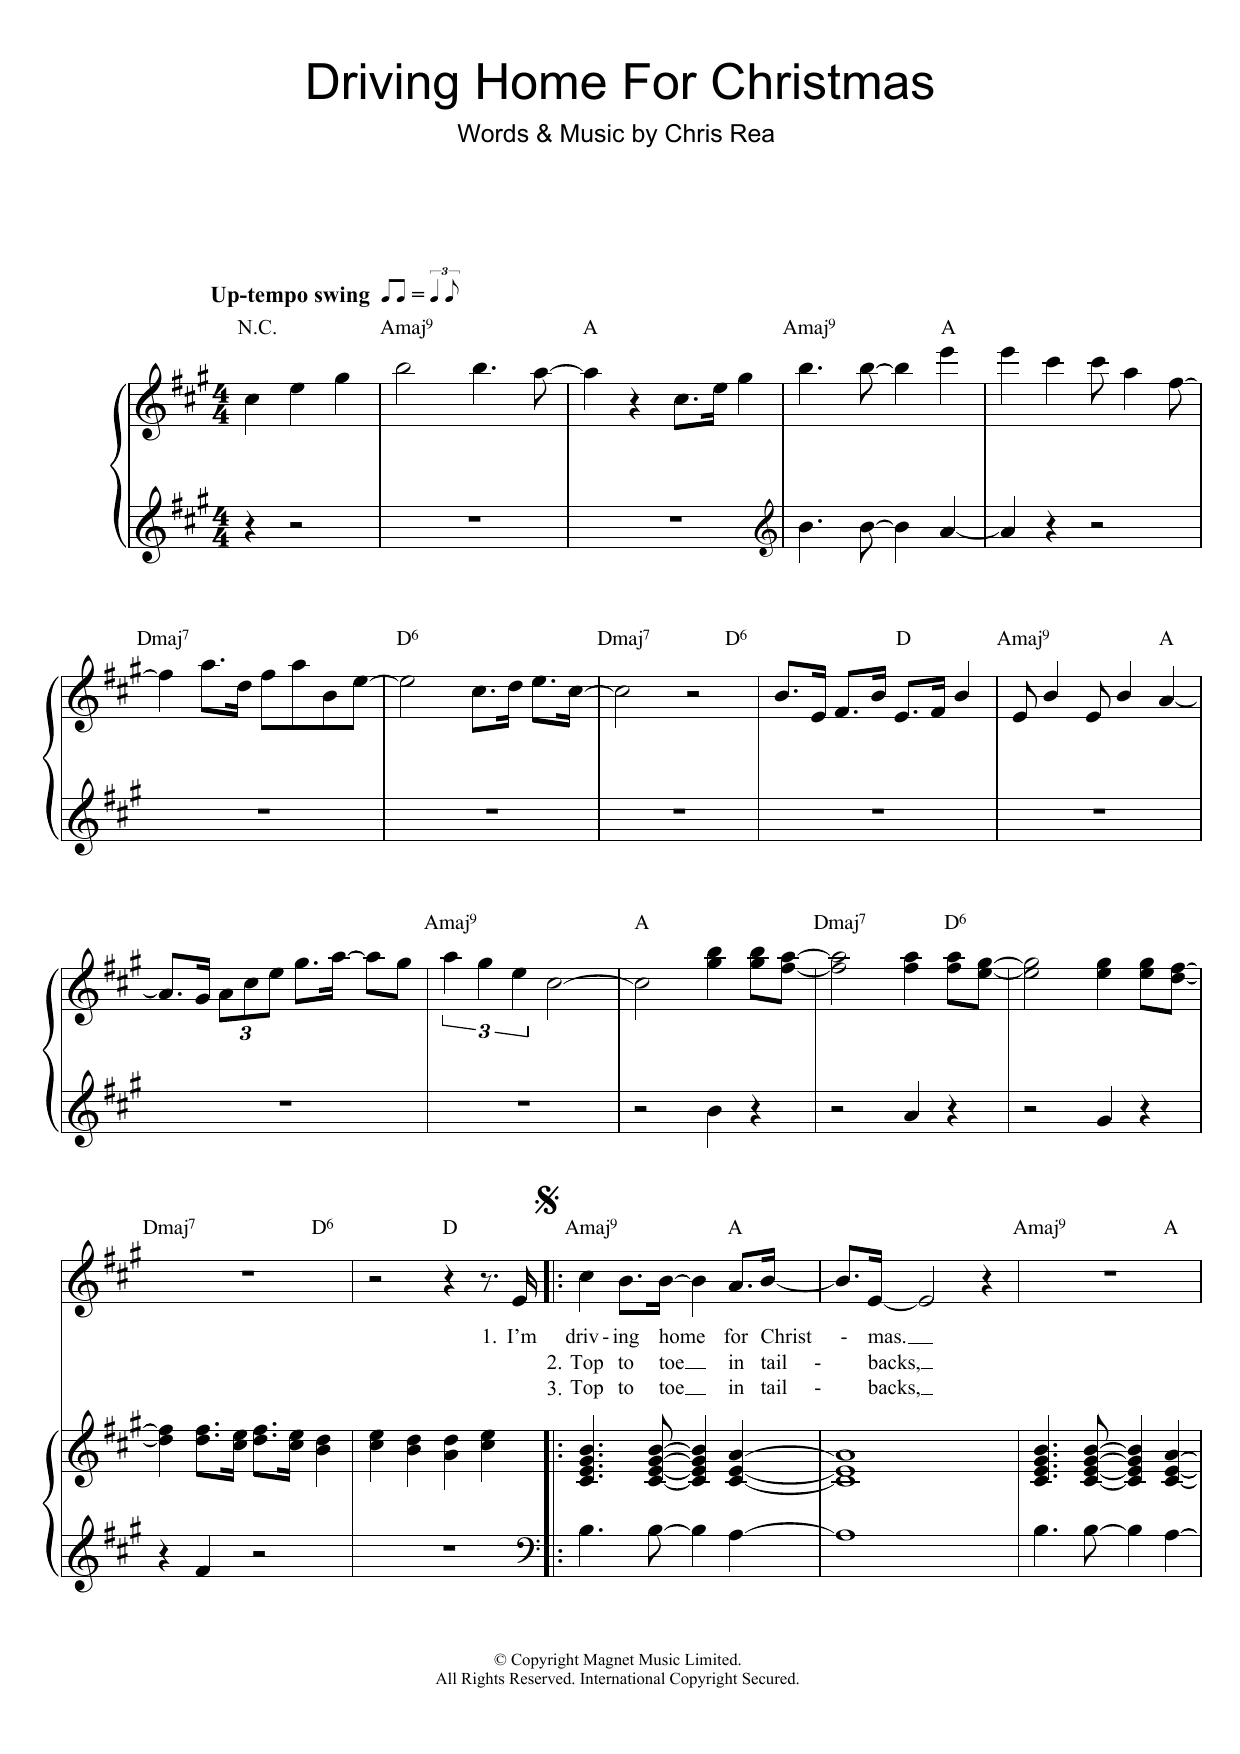 Download Chris Rea Driving Home For Christmas Sheet Music